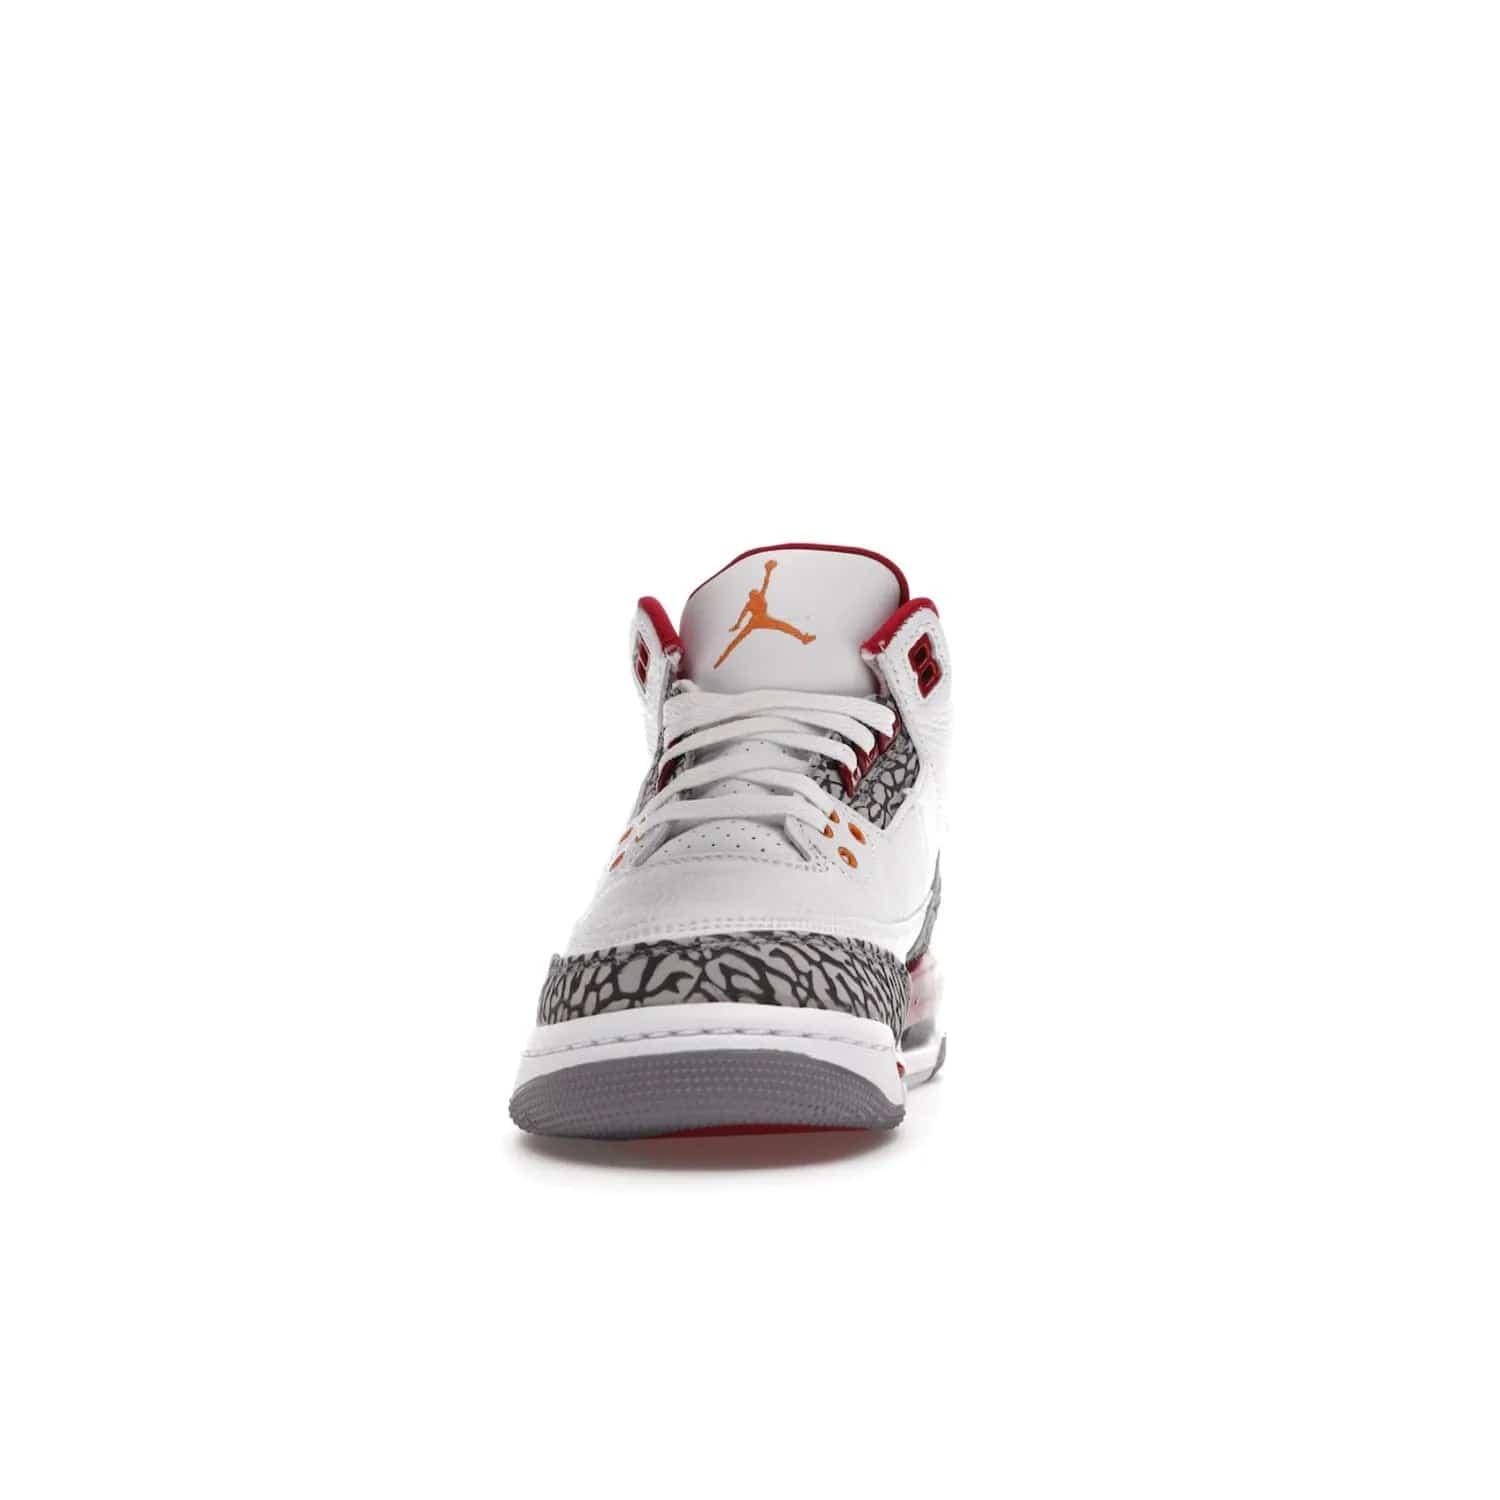 Jordan 3 Retro Cardinal (GS) - Image 11 - Only at www.BallersClubKickz.com - Shop the kid-sized Air Jordan 3 Retro Cardinal GS, released Feb 2022. White tumbled leather upper, light curry accenting, cement grey and classic red details throughout. Visible Air cushioning, midsole, and an eye-catching outsole. Show off your style with this fashionable streetwear silhouette.